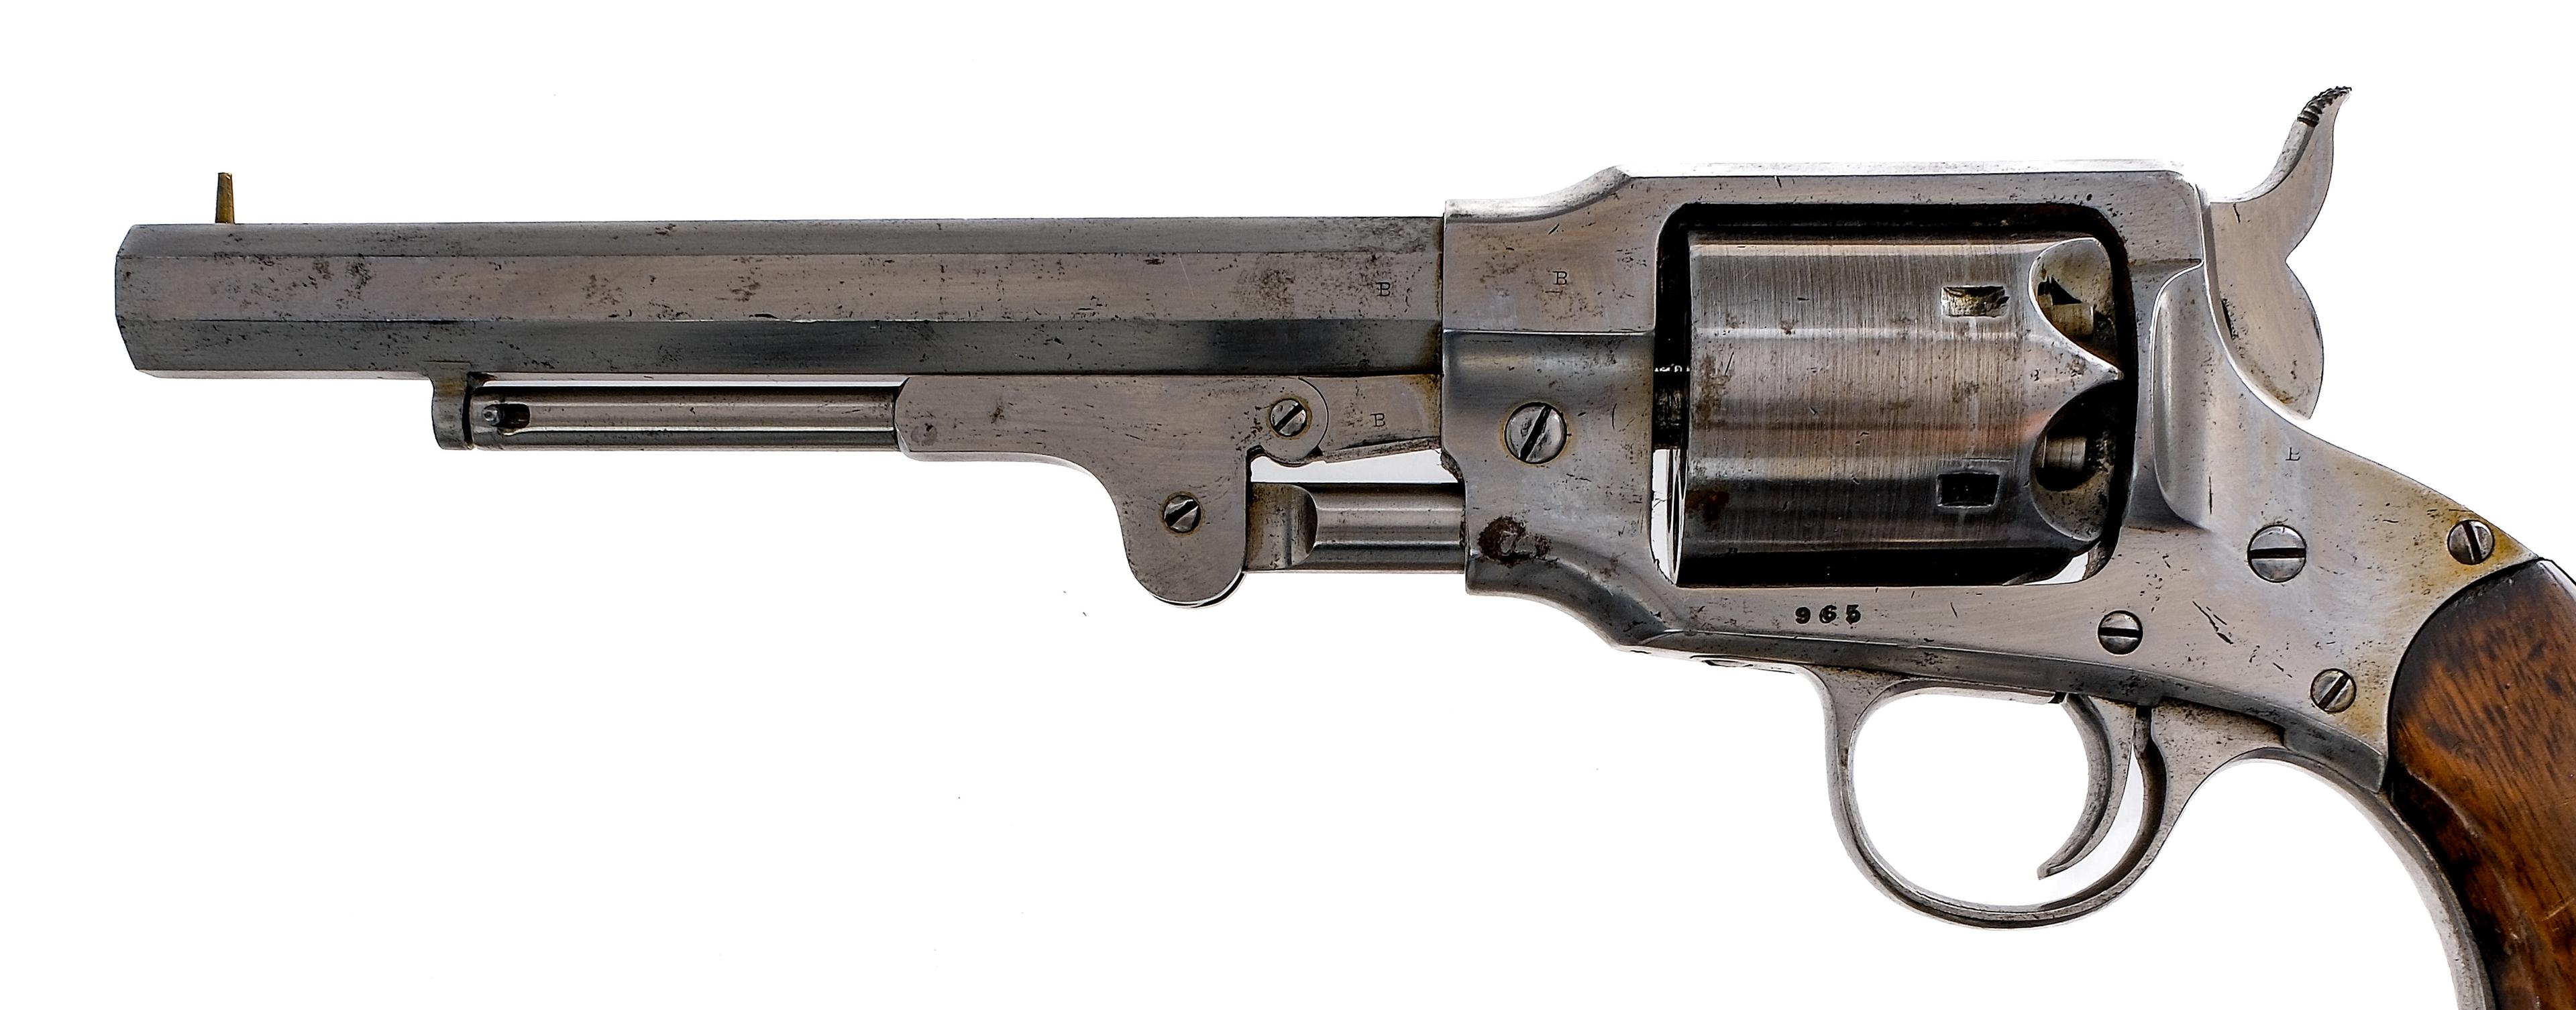 Rogers & Spencer Army .44 Percussion Revolver